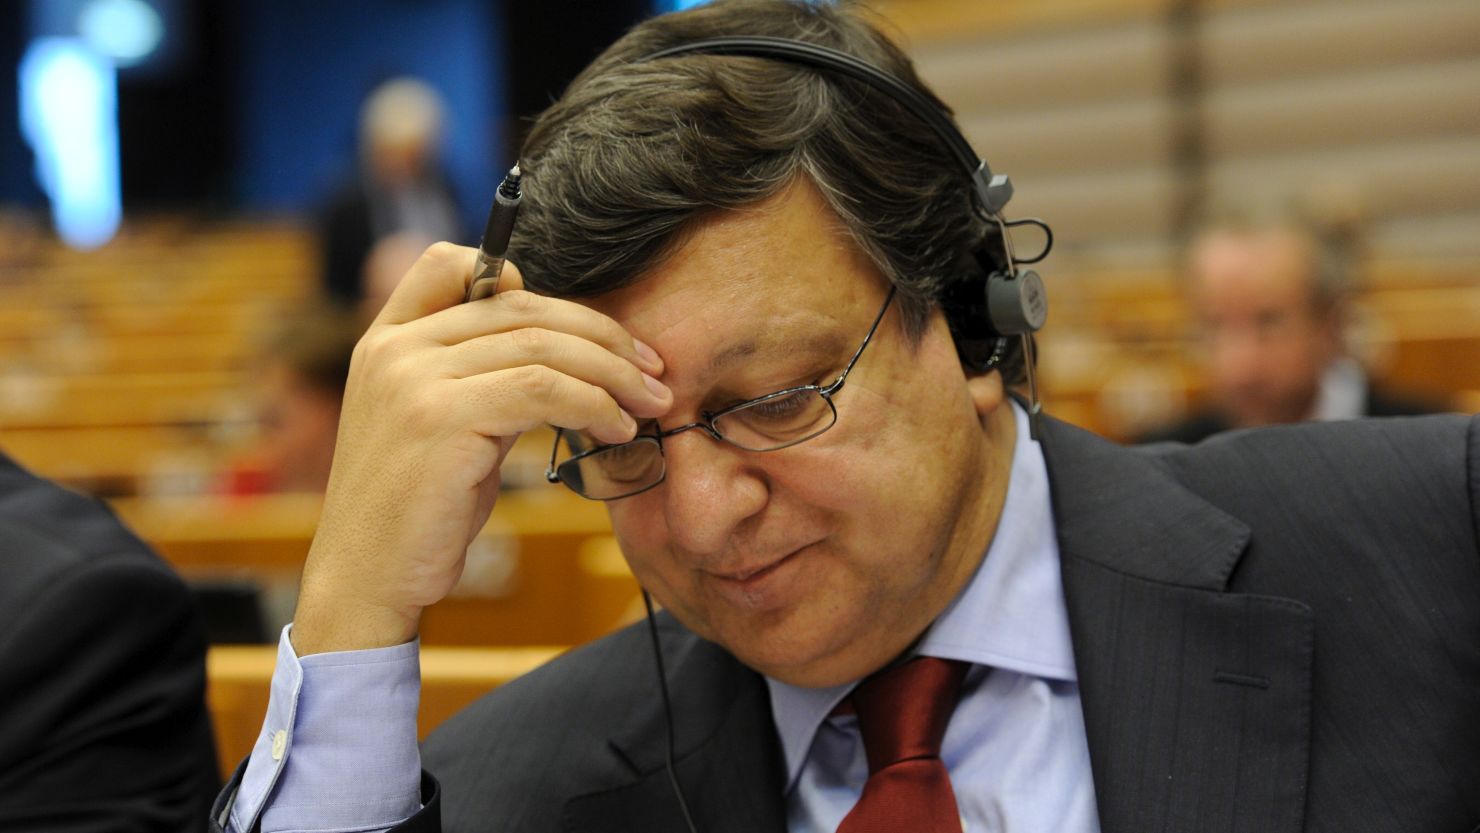 José Manuel Barroso, president of the European Commission, said the EU needs to act now on bailing out Greece.